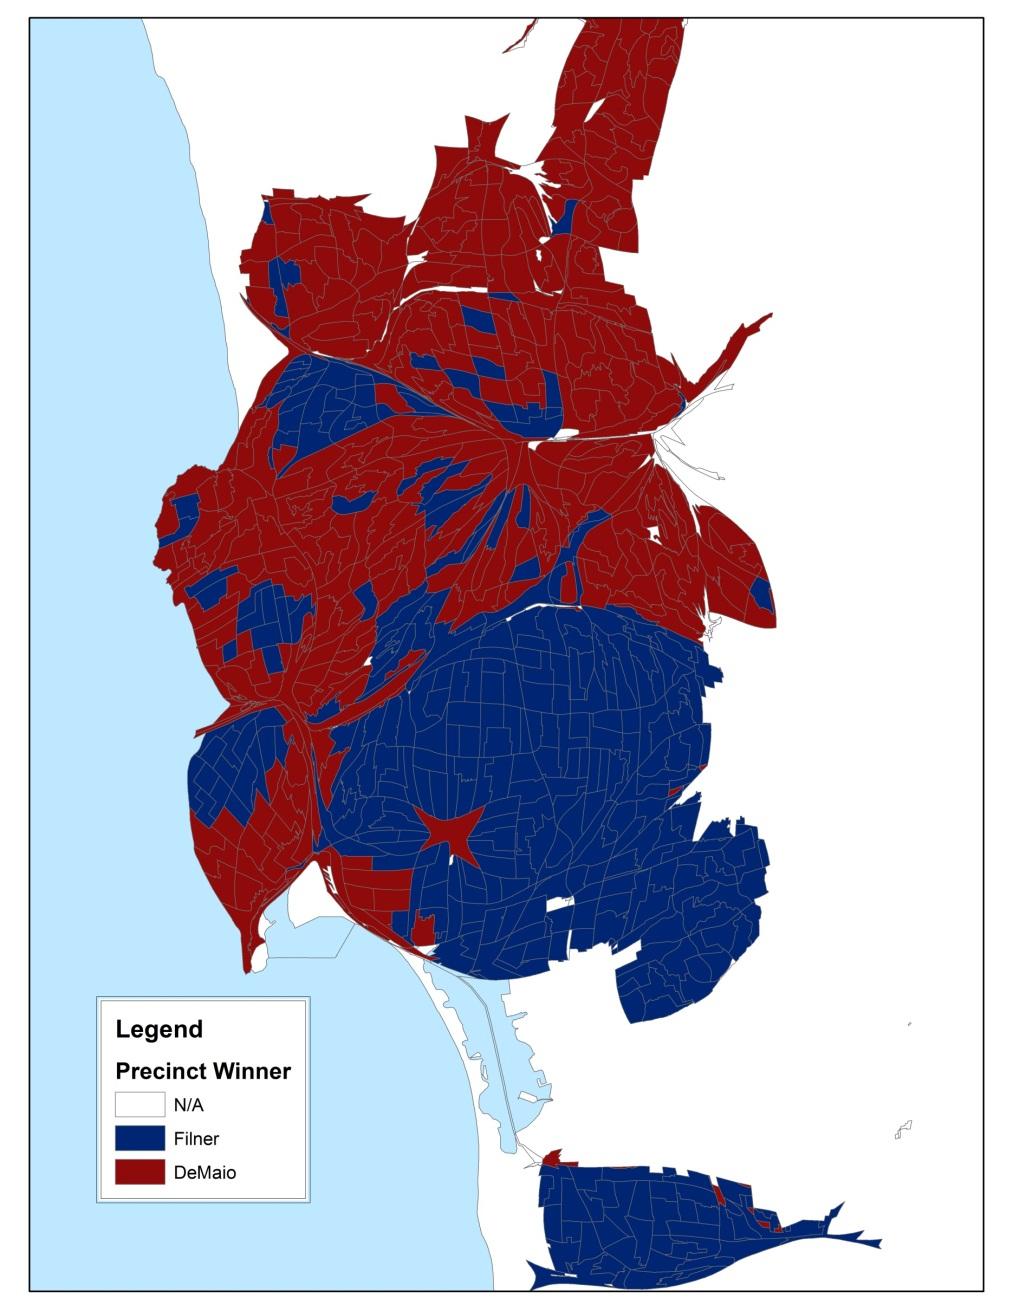 The peculiar shape of the City of San Diego and the varying size of voting precincts obscure the actual distribution of votes in the mayoral election.